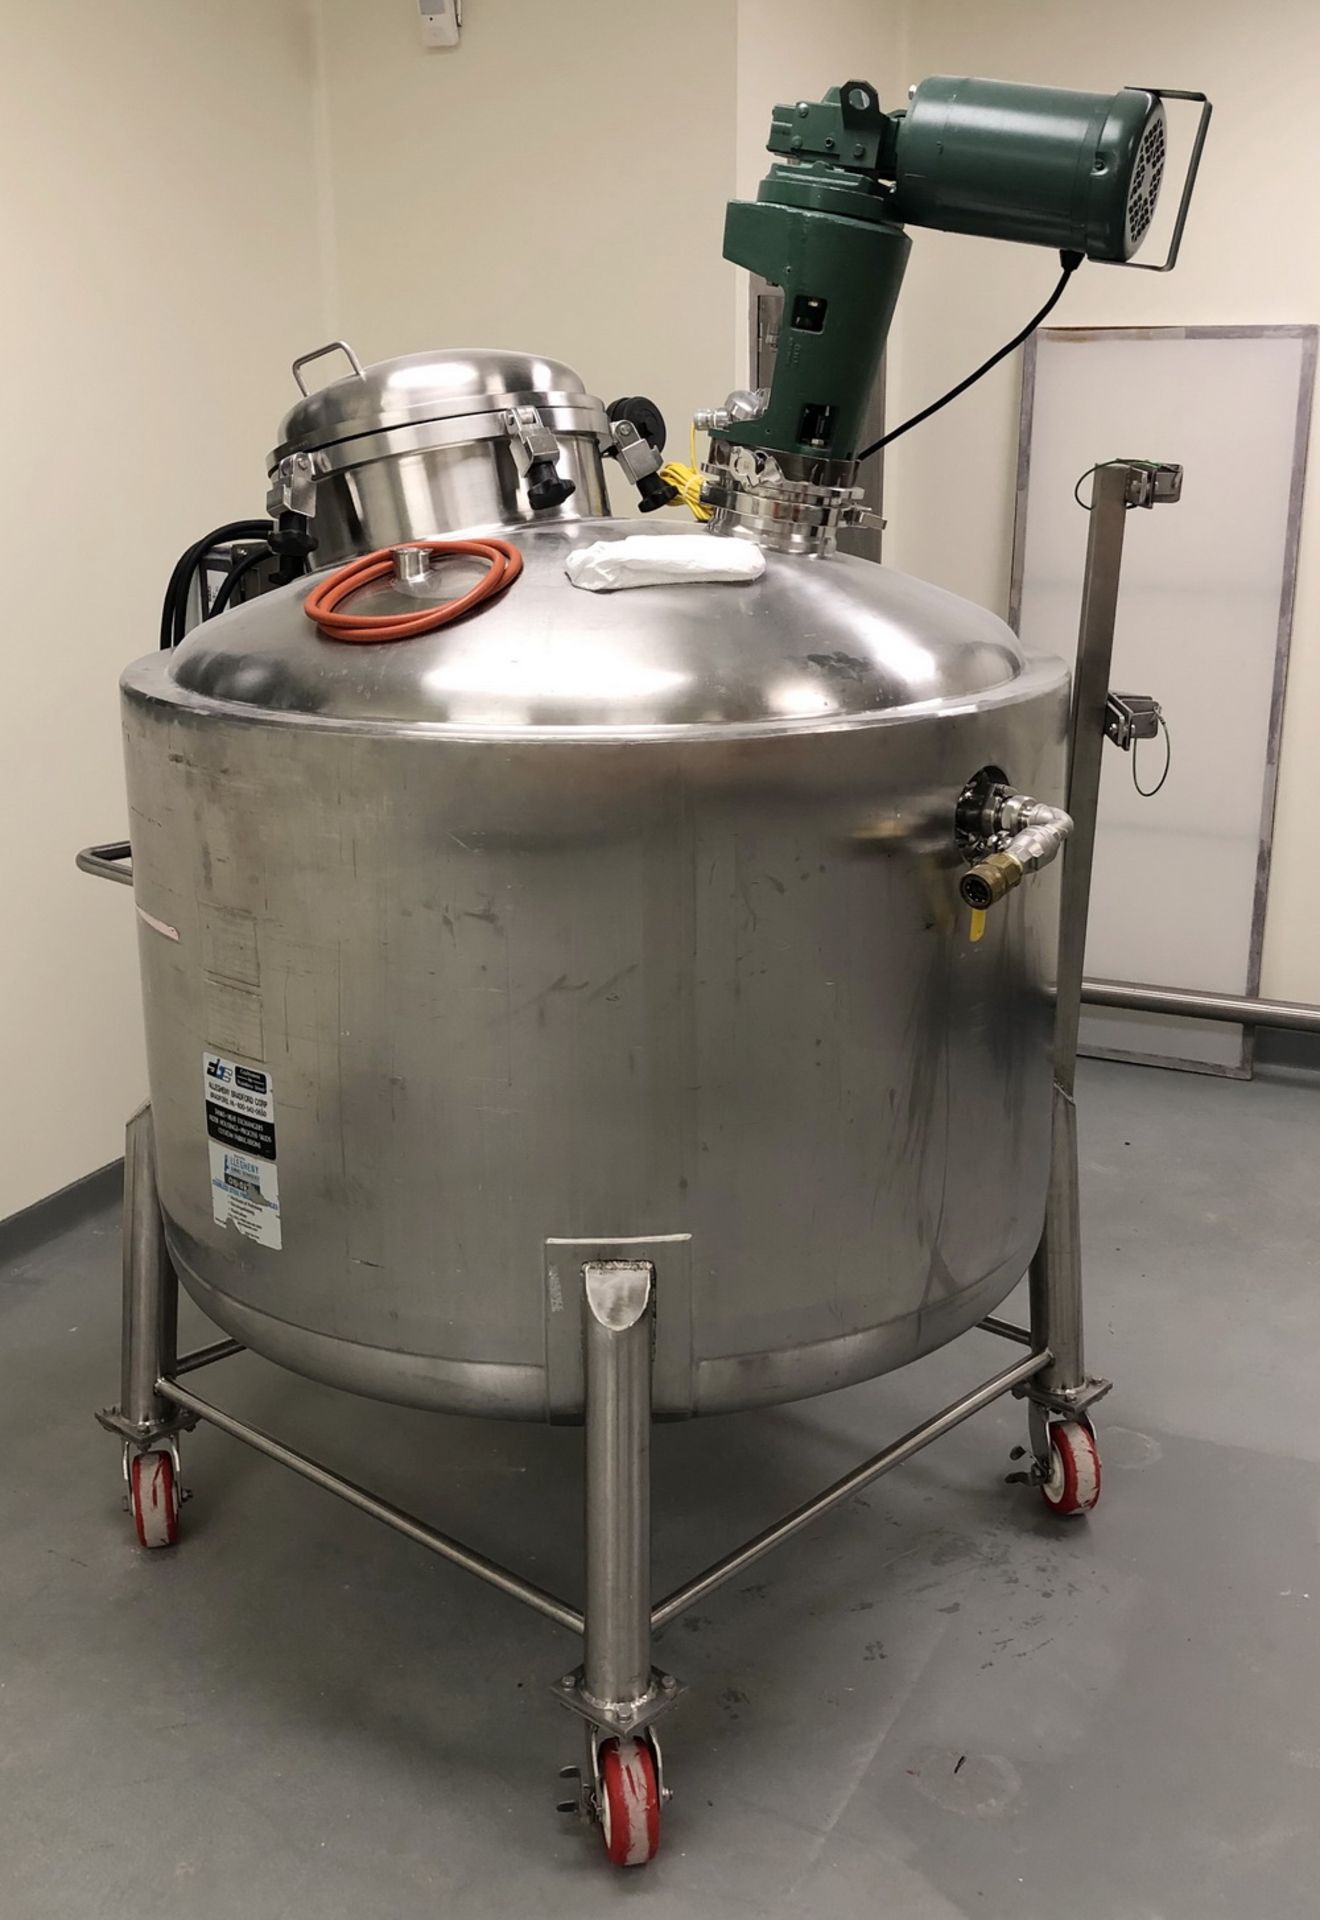 Allegheny Bradford 600 Liter Stainless Steel Jacketed Tank with mixer, S/N 11620-1-1-1